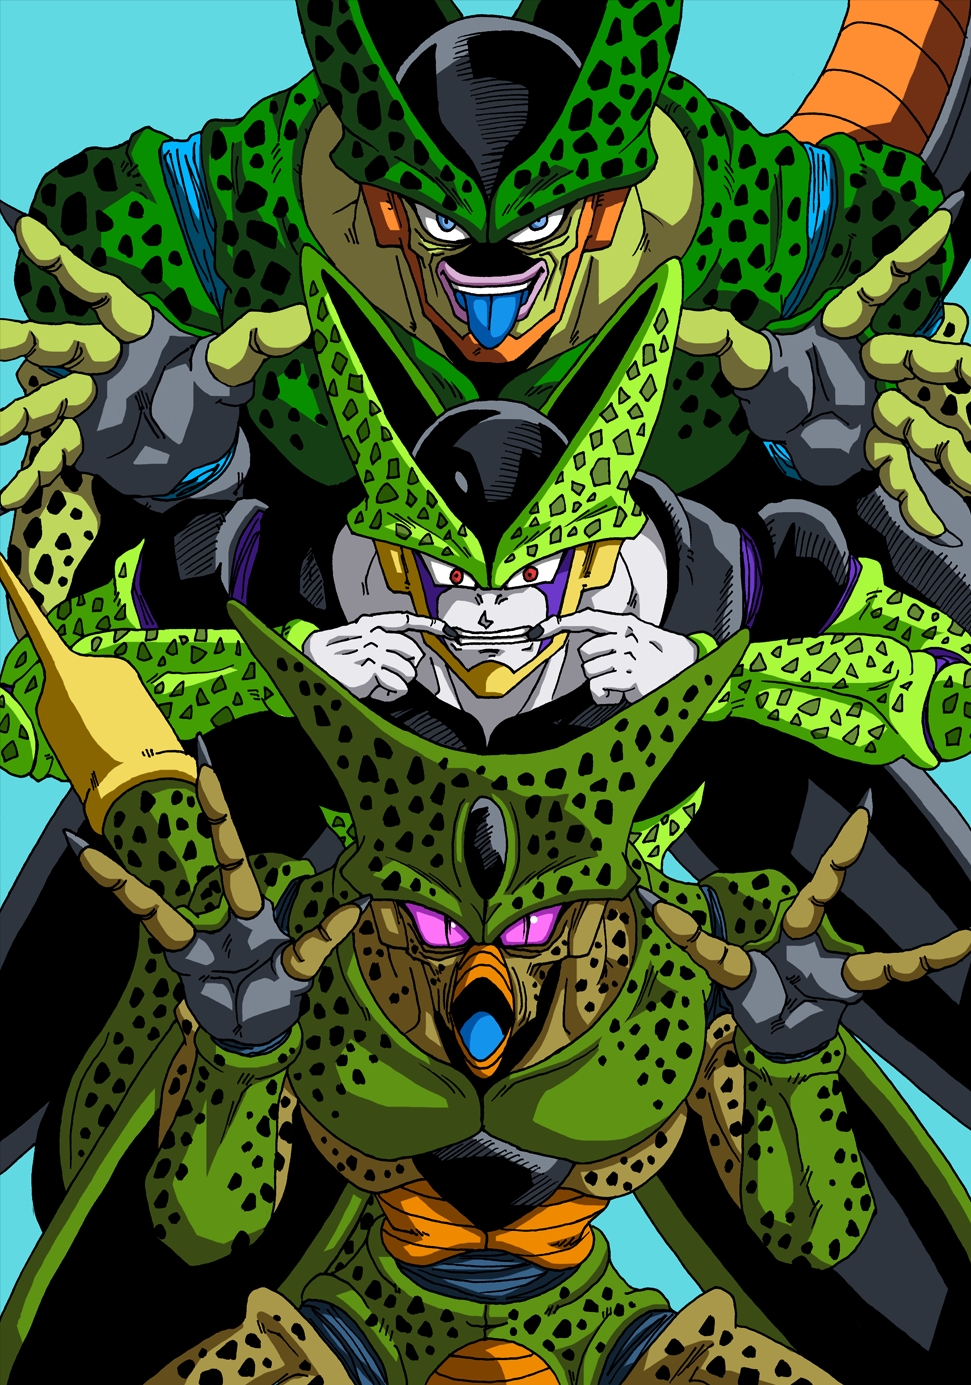 Cell From Dragon Ball - HD Wallpaper 